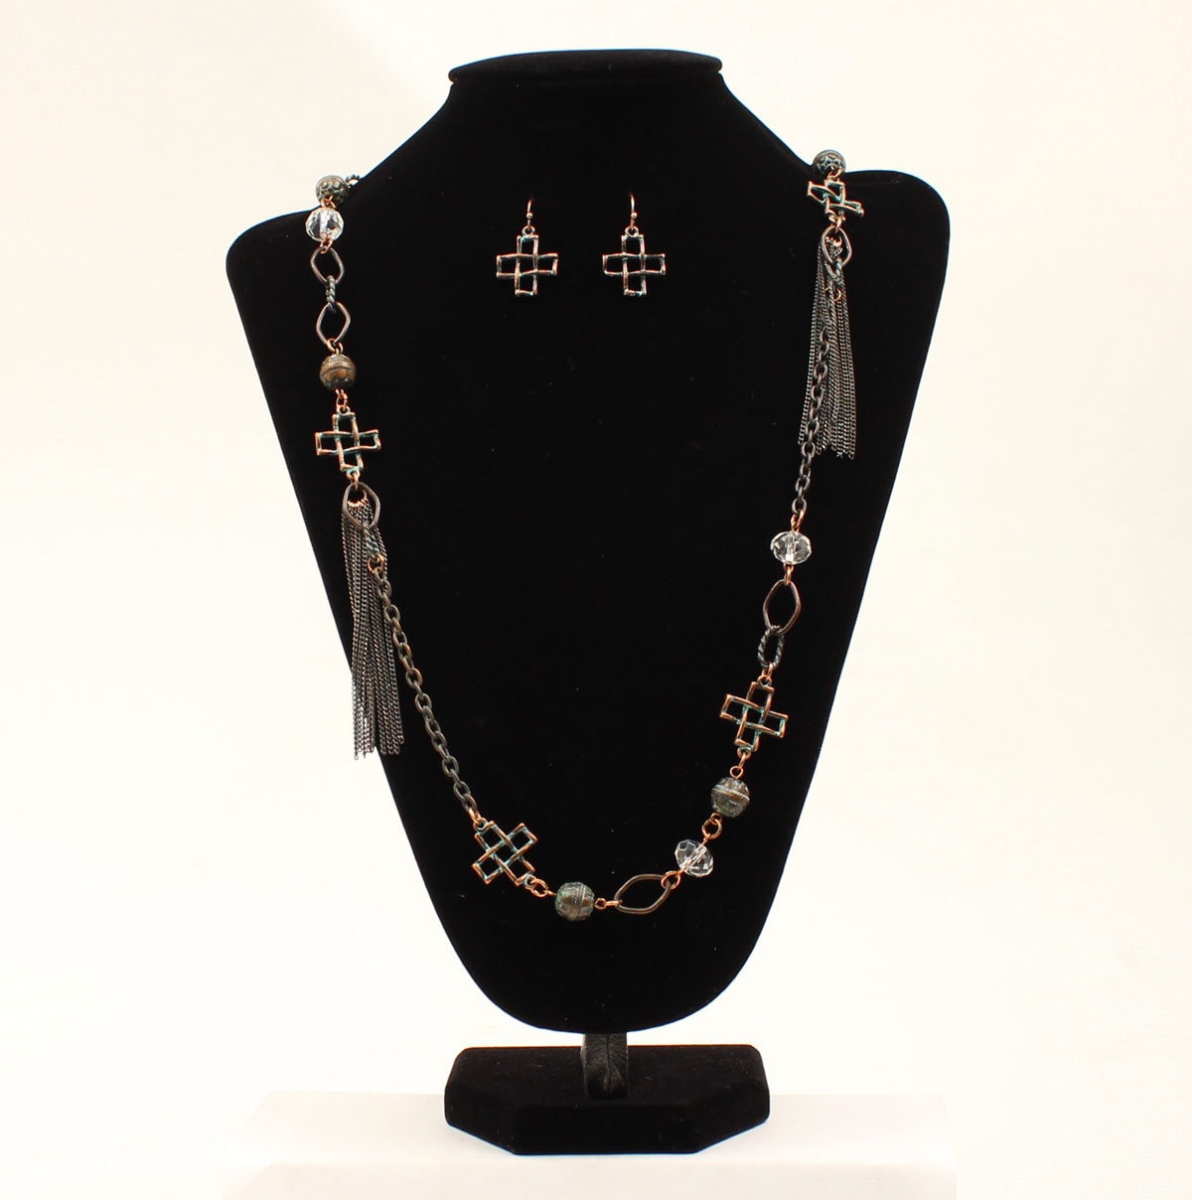 30927 Hanging Chain Tassels Necklace Set